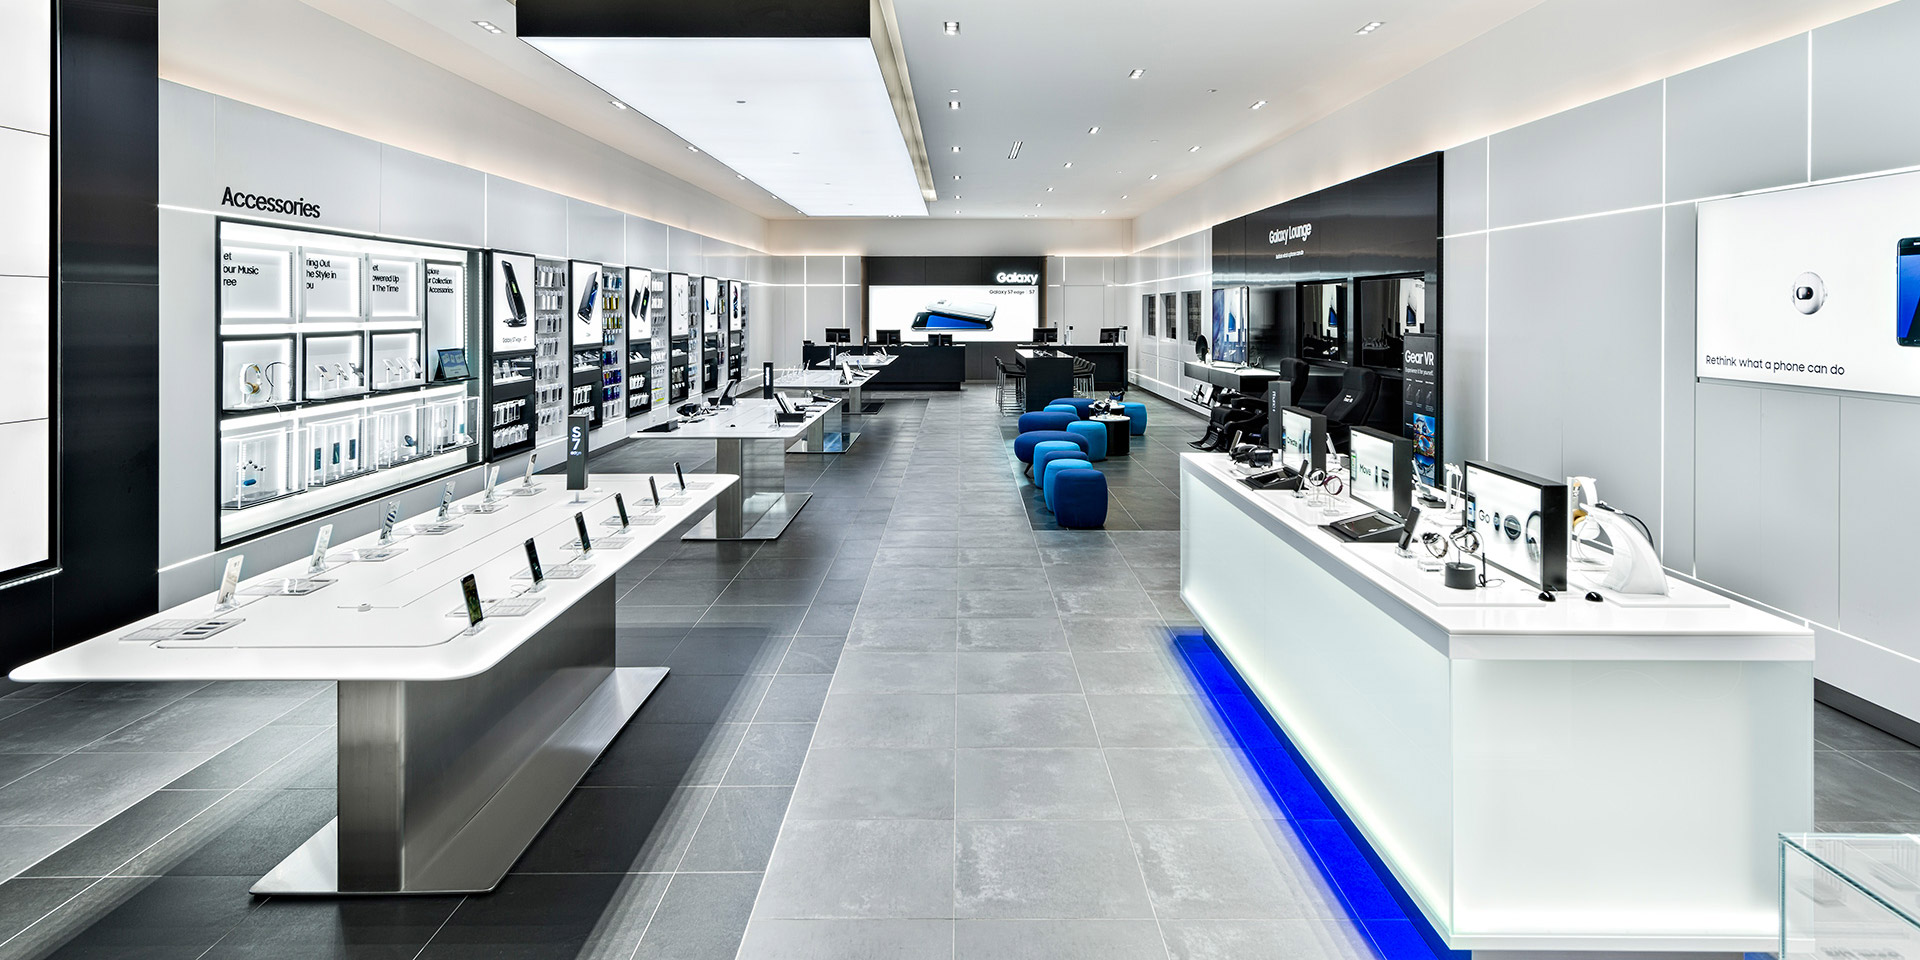 Samsung store interior design by Cutler, showing product display units and a futuristic techy design vibe